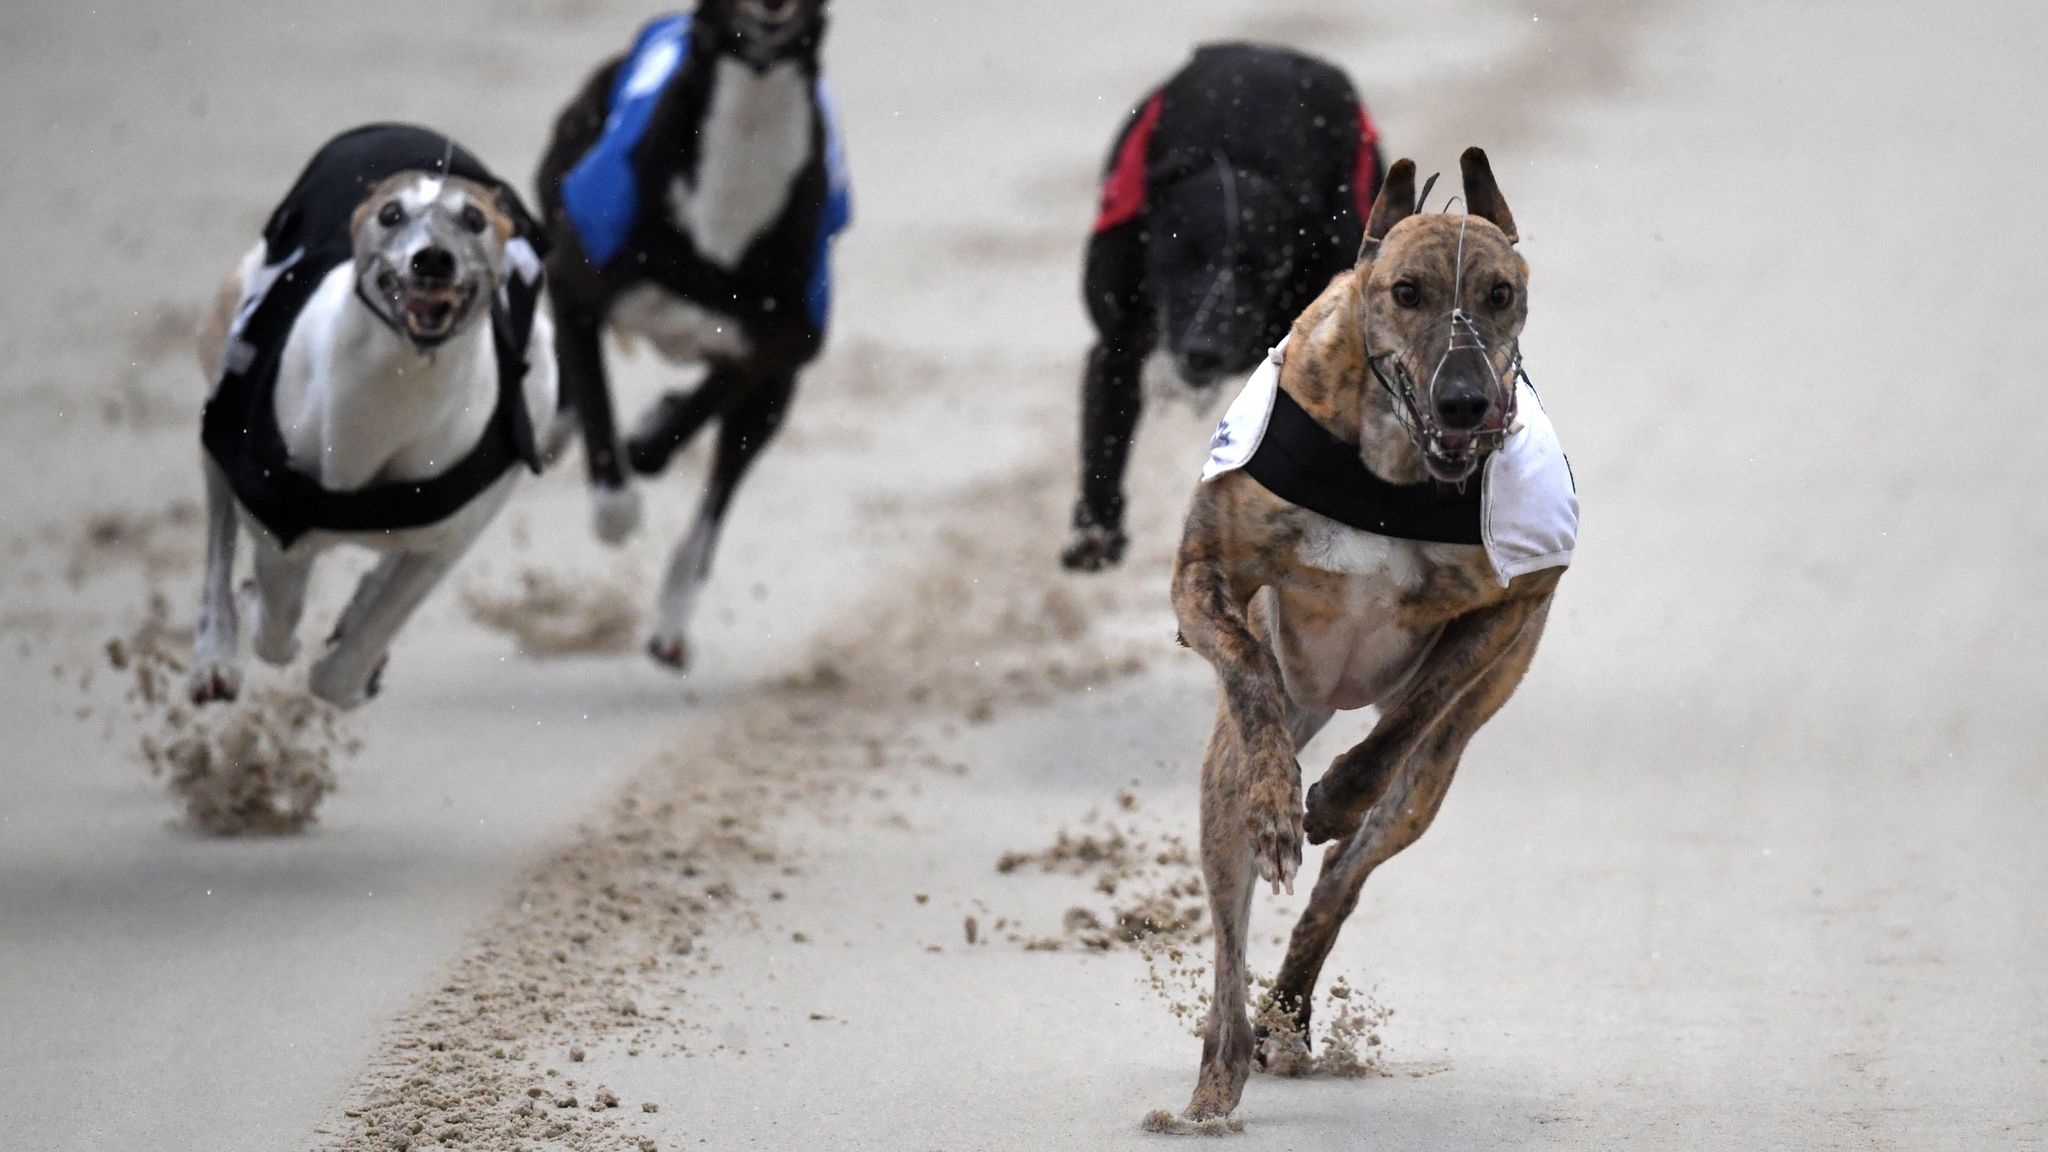 Challenge boiler To give permission Scotland: Campaigners call for complete ban on greyhound racing with some  dogs found drugged with cocaine | UK News | Sky News